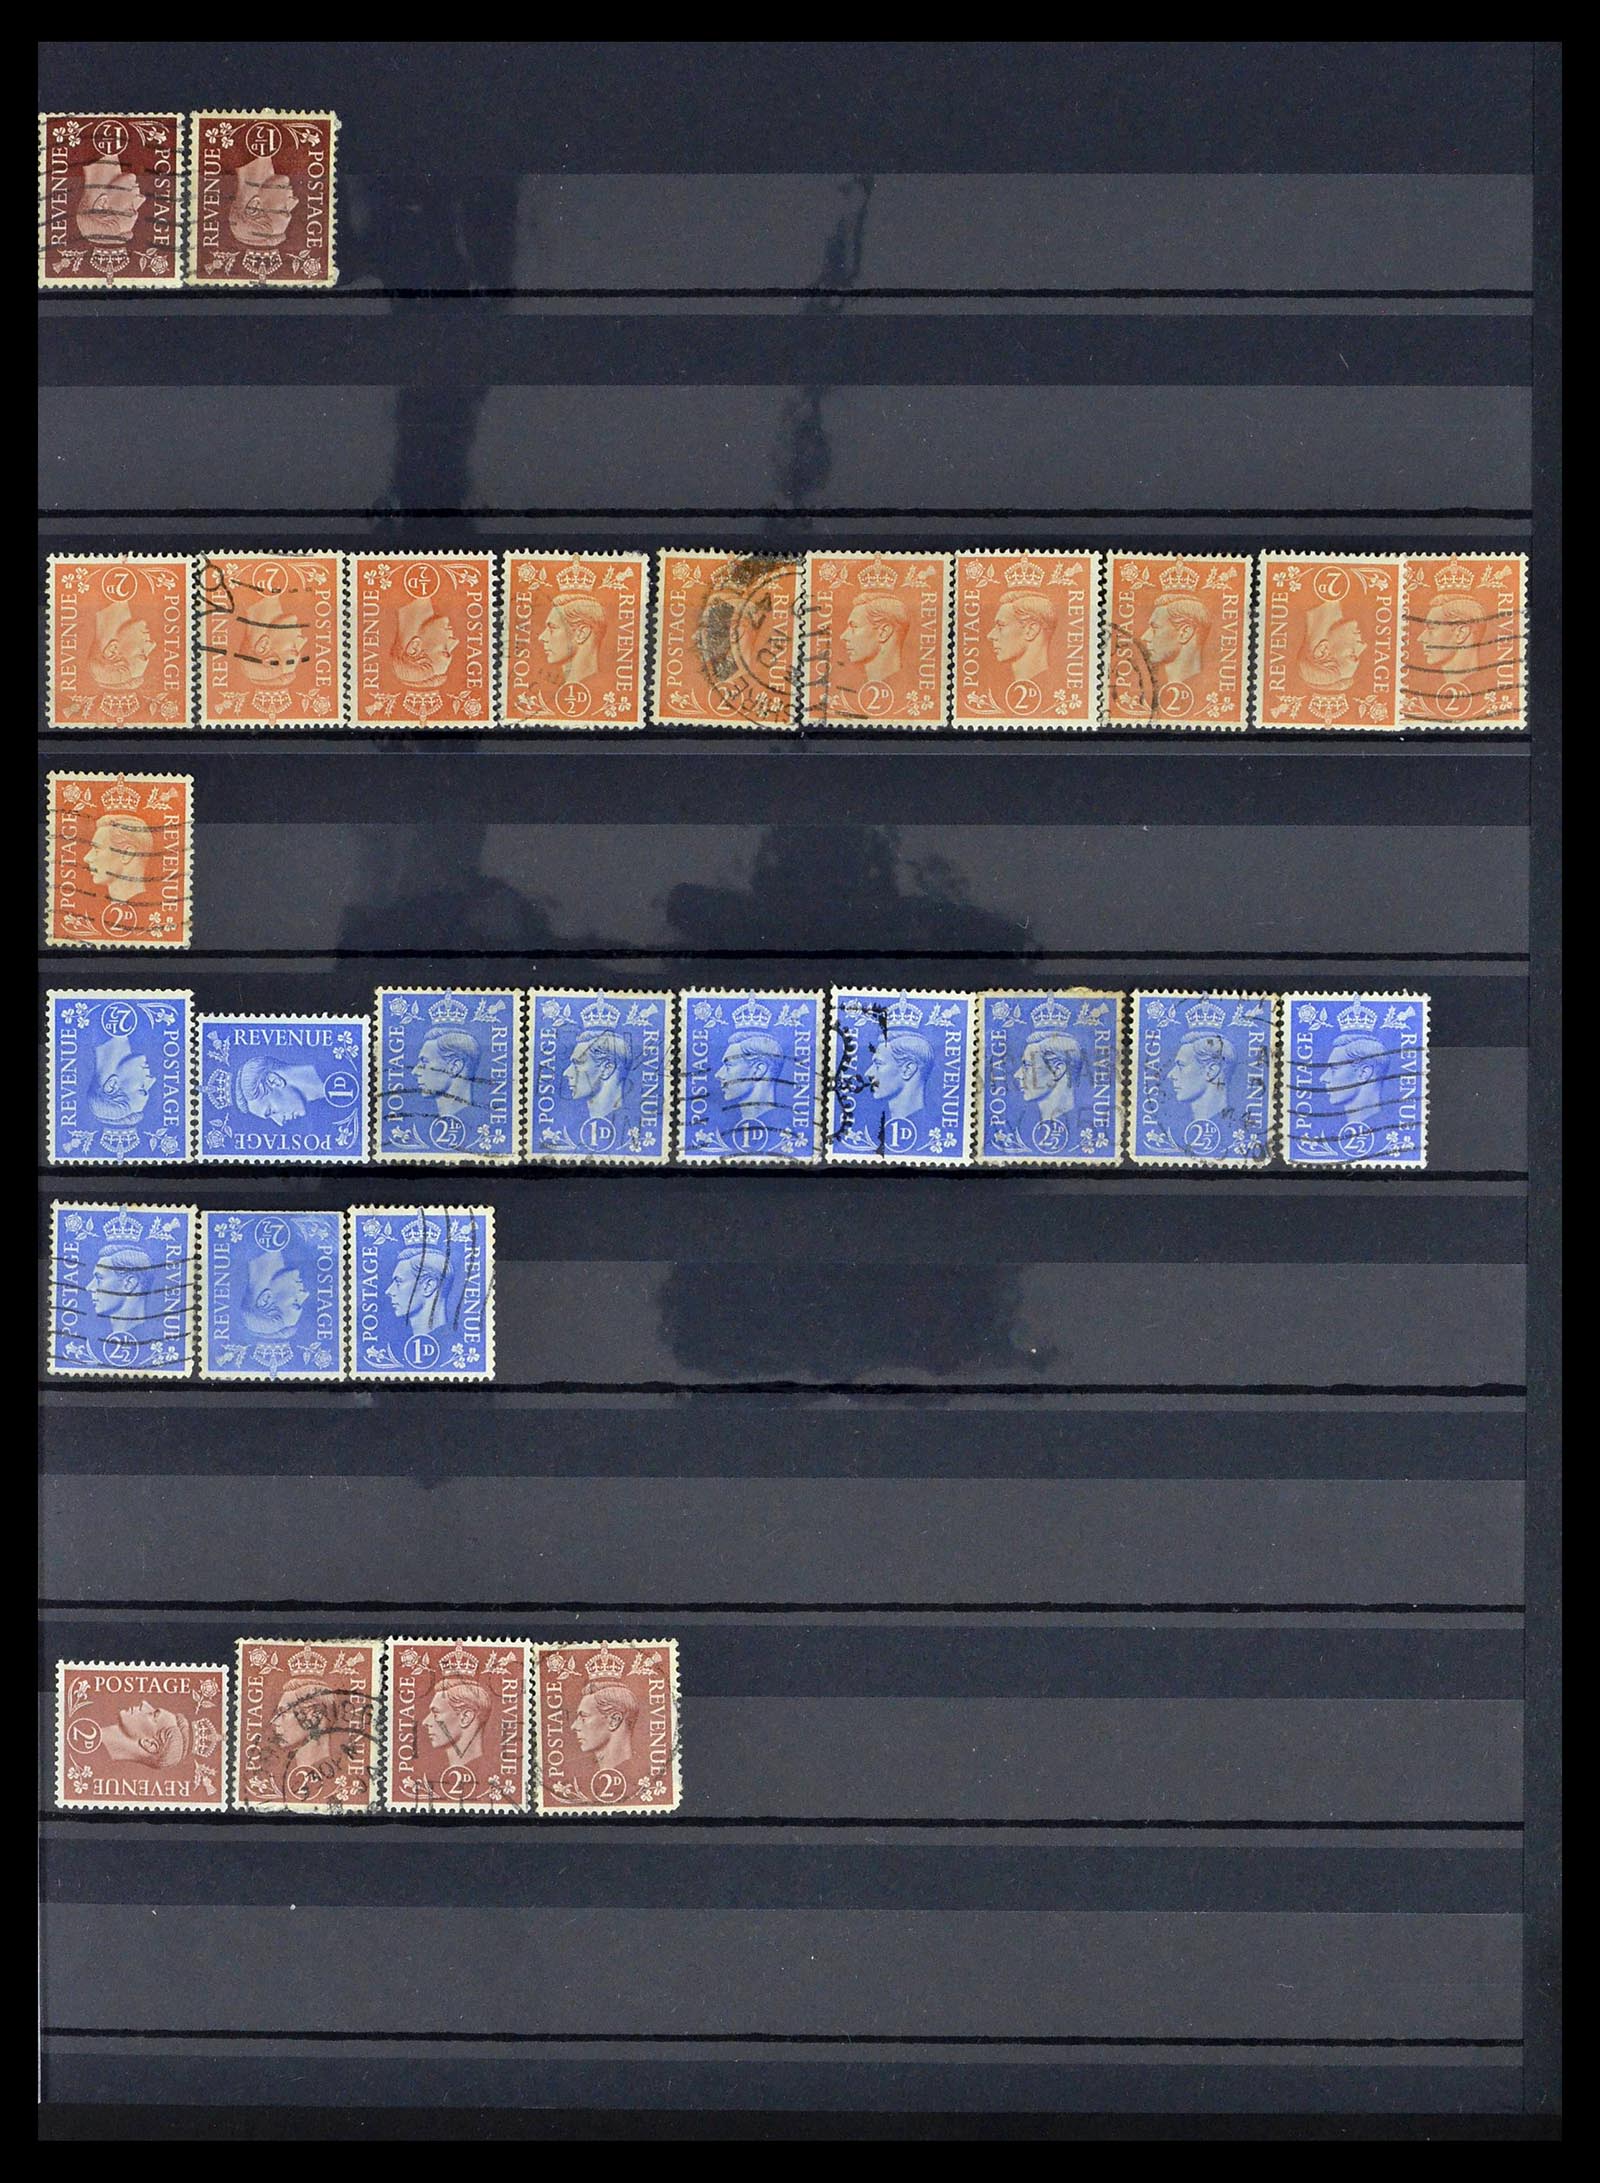 39196 0095 - Stamp collection 39196 Great Britain 1844-1955.